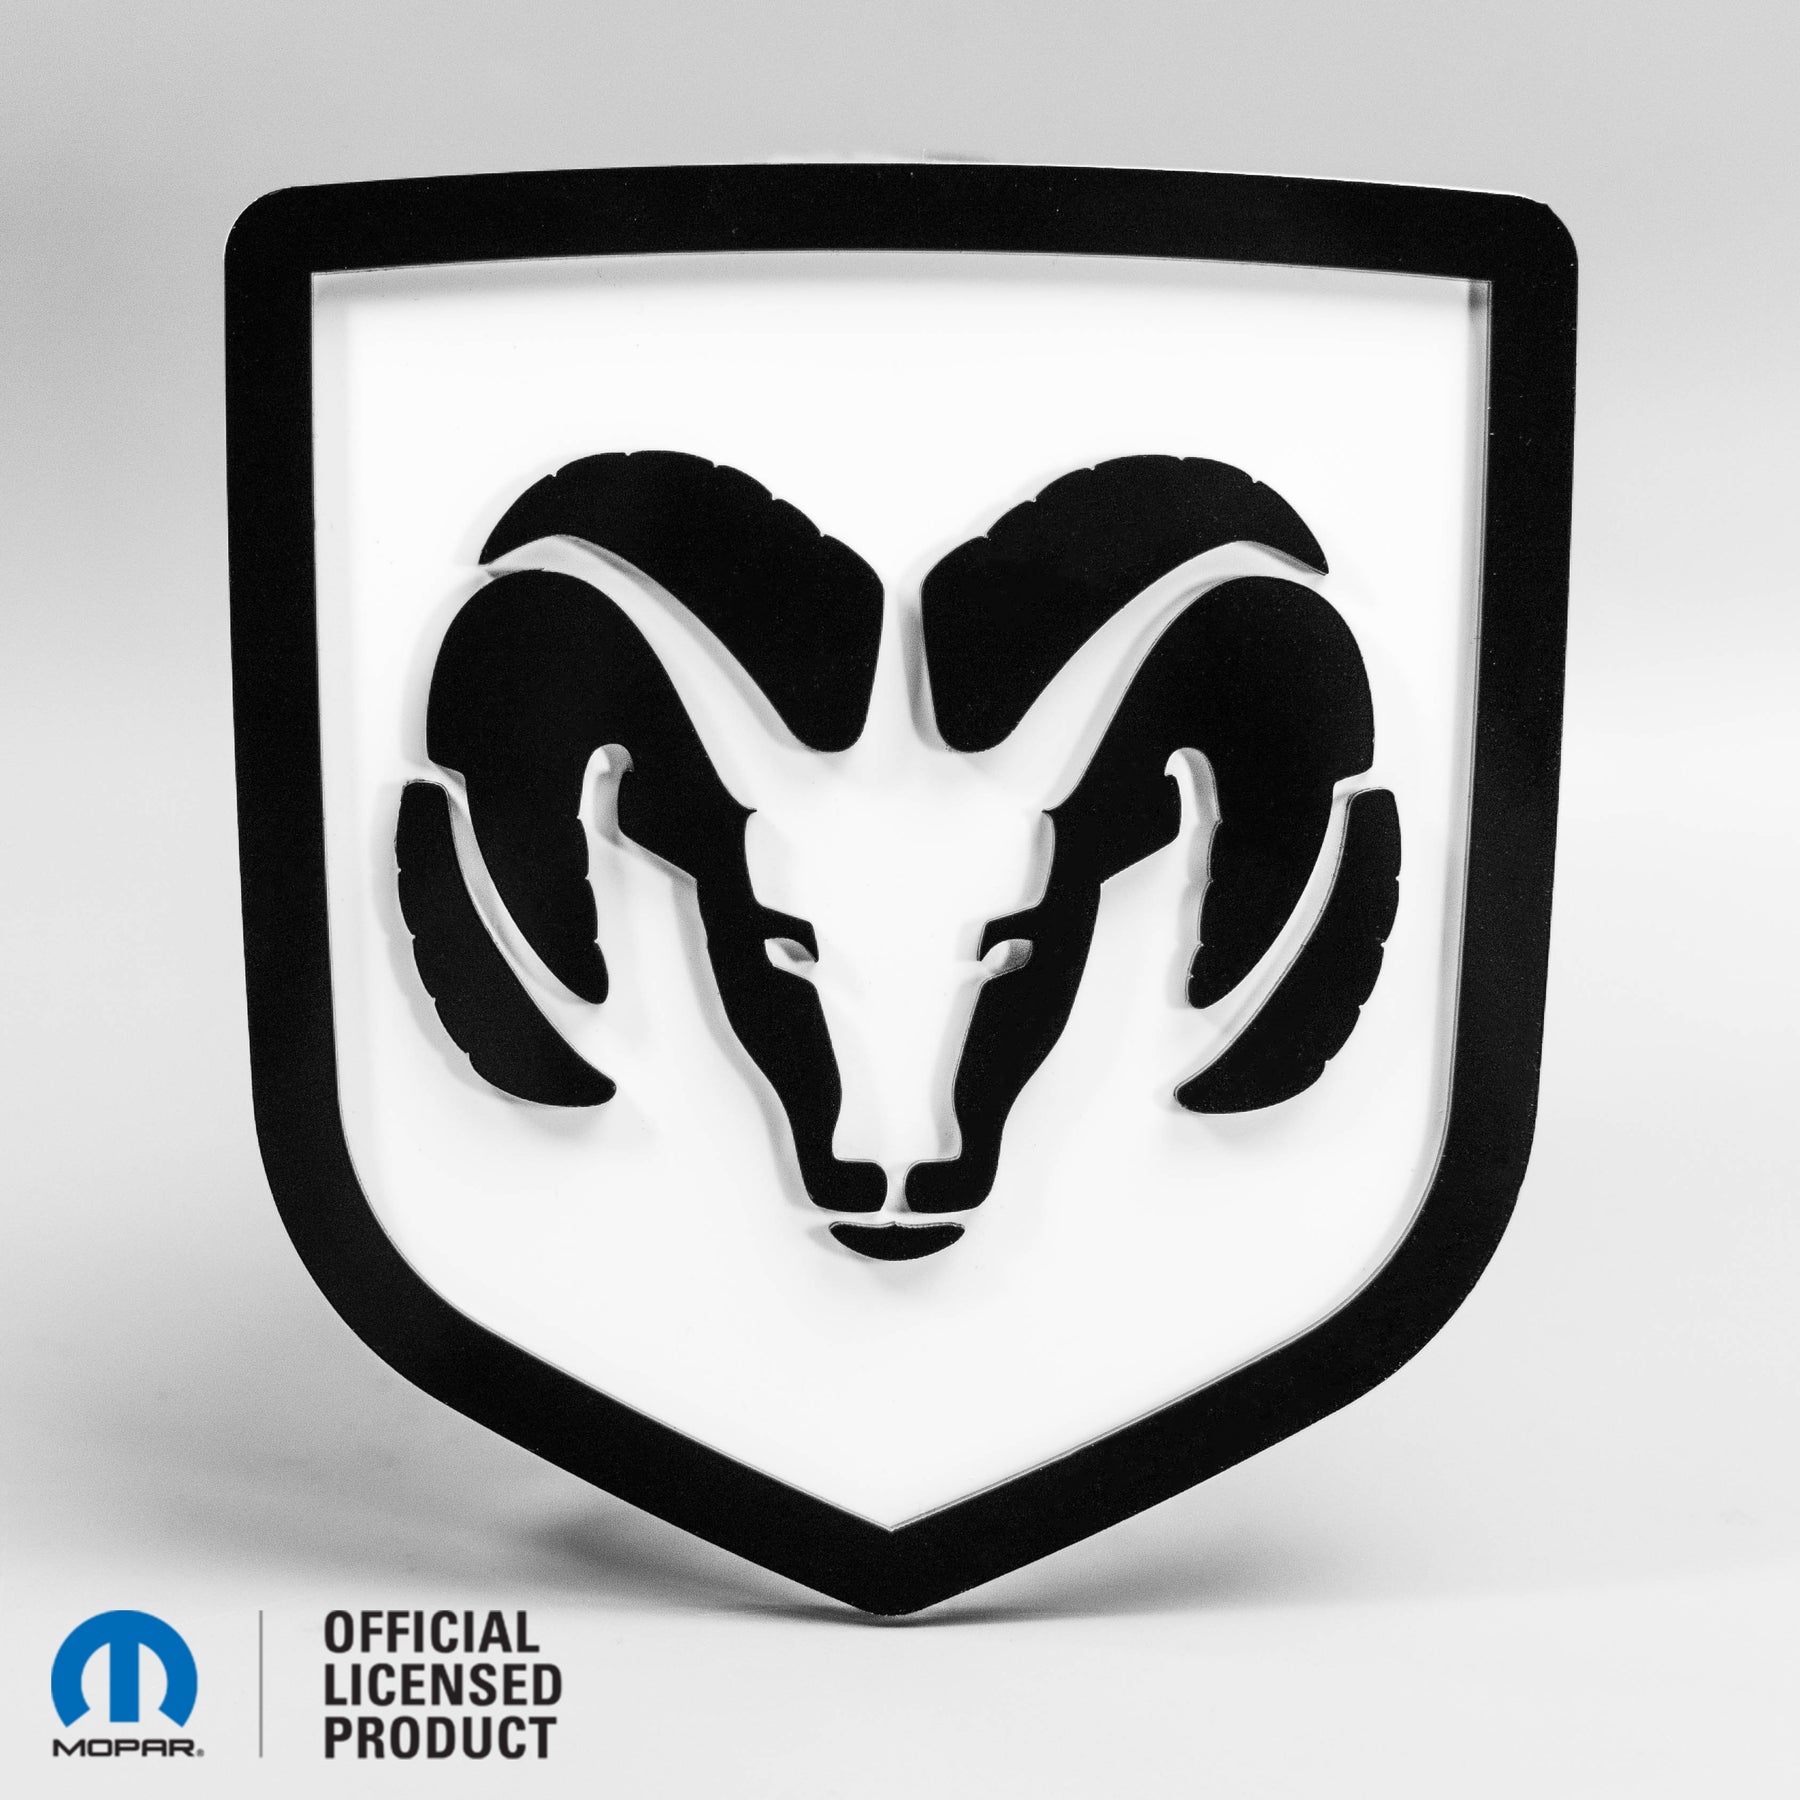 RAM® HEAD LOGO STYLE 2 TAILGATE BADGE - FITS 2009-2018 DODGE® RAM® TAILGATE -1500, 2500, 3500 - GLOSS ON WHITE - Officially Licensed Product